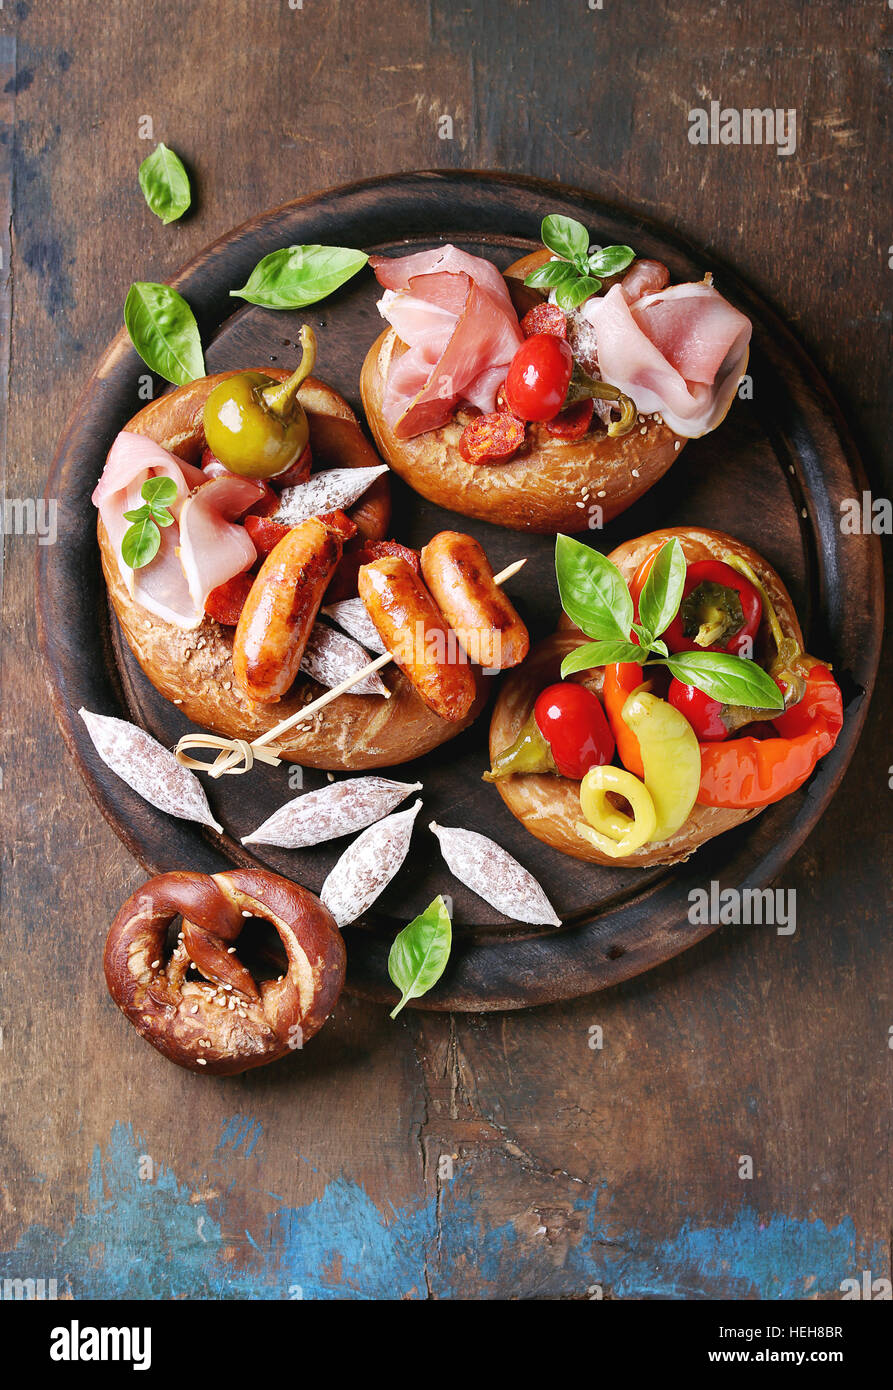 Variety of meat snacks fried sausages, wienerwurst, ham, marinated chili peppers served in salted pretzels with fresh basil on wood chopping board ove Stock Photo